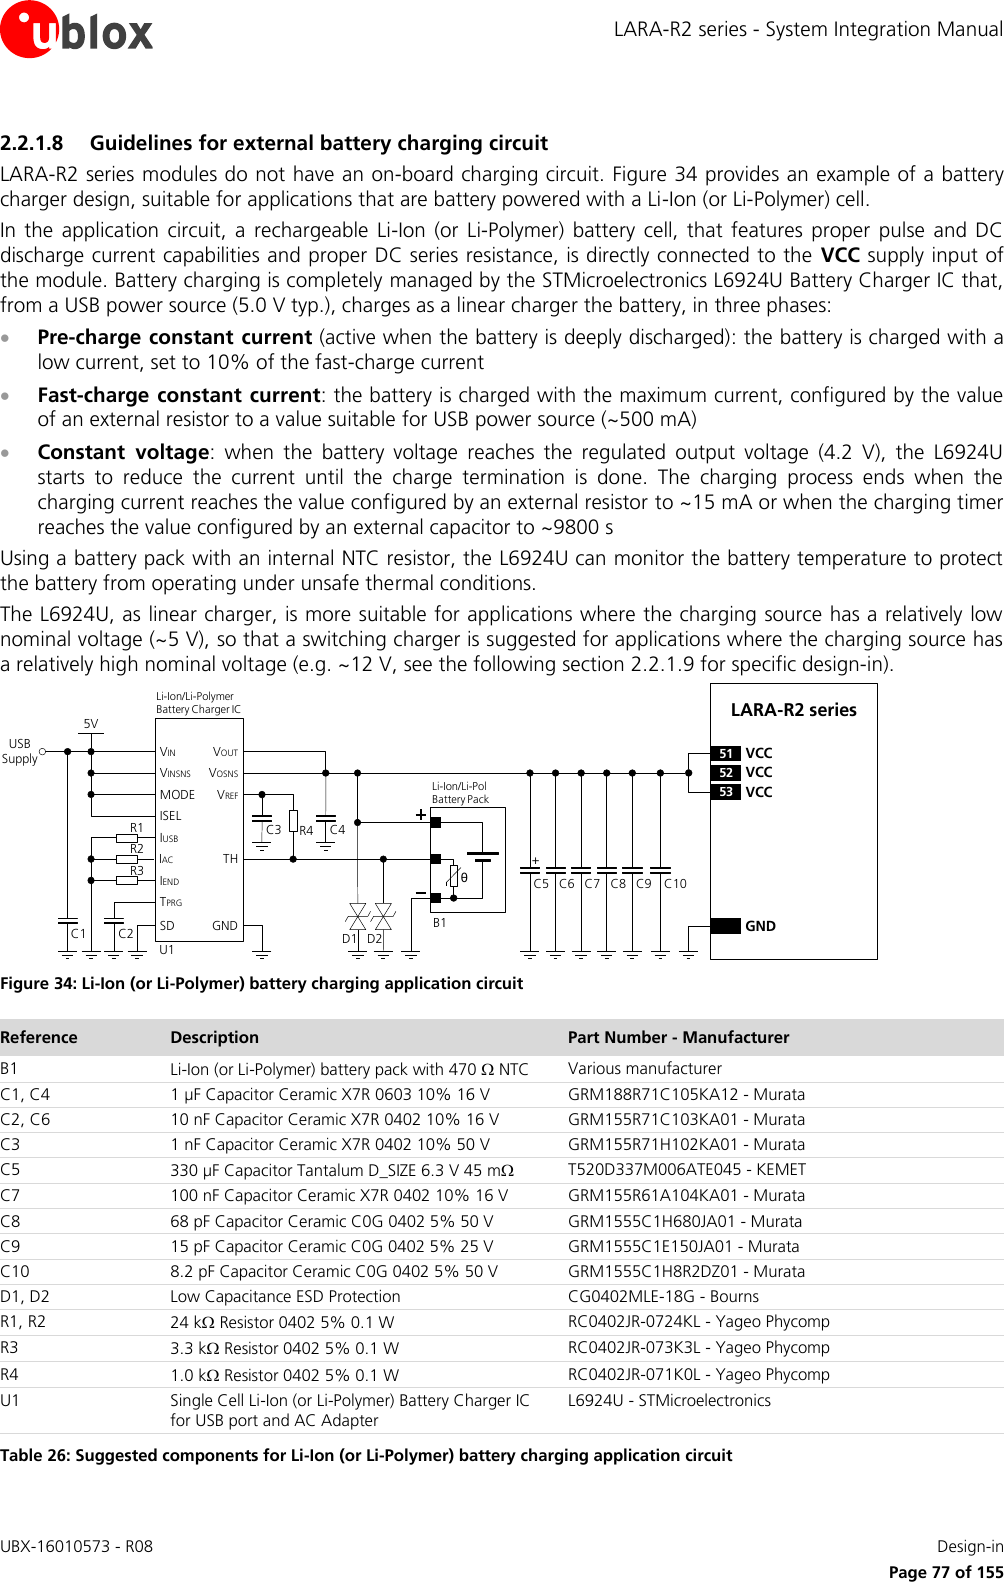 LARA-R2 series - System Integration Manual UBX-16010573 - R08    Design-in     Page 77 of 155 2.2.1.8 Guidelines for external battery charging circuit LARA-R2 series modules do not have an on-board charging circuit. Figure 34 provides an example of a battery charger design, suitable for applications that are battery powered with a Li-Ion (or Li-Polymer) cell. In  the  application  circuit,  a  rechargeable  Li-Ion  (or  Li-Polymer)  battery  cell,  that  features  proper  pulse  and  DC discharge current capabilities and proper DC series resistance, is directly connected to the  VCC supply input of the module. Battery charging is completely managed by the STMicroelectronics L6924U Battery Charger IC that, from a USB power source (5.0 V typ.), charges as a linear charger the battery, in three phases:  Pre-charge constant current (active when the battery is deeply discharged): the battery is charged with a low current, set to 10% of the fast-charge current  Fast-charge constant current: the battery is charged with the maximum current, configured by the value of an external resistor to a value suitable for USB power source (~500 mA)  Constant  voltage:  when  the  battery  voltage  reaches  the  regulated  output  voltage  (4.2  V),  the  L6924U starts  to  reduce  the  current  until  the  charge  termination  is  done.  The  charging  process  ends  when  the charging current reaches the value configured by an external resistor to ~15 mA or when the charging timer reaches the value configured by an external capacitor to ~9800 s Using a battery pack with an internal NTC resistor, the L6924U can monitor the battery temperature to protect the battery from operating under unsafe thermal conditions. The L6924U, as linear charger, is more suitable for applications where the charging source has a relatively low nominal voltage (~5 V), so that a switching charger is suggested for applications where the charging source has a relatively high nominal voltage (e.g. ~12 V, see the following section 2.2.1.9 for specific design-in). C5 C8GNDC7C6 C9LARA-R2 series52 VCC53 VCC51 VCC+USB SupplyC3 R4θU1IUSBIACIENDTPRGSDVINVINSNSMODEISELC2C15VTHGNDVOUTVOSNSVREFR1R2R3Li-Ion/Li-Pol Battery PackD1B1C4Li-Ion/Li-Polymer    Battery Charger ICD2C10 Figure 34: Li-Ion (or Li-Polymer) battery charging application circuit Reference Description Part Number - Manufacturer B1 Li-Ion (or Li-Polymer) battery pack with 470  NTC Various manufacturer C1, C4 1 µF Capacitor Ceramic X7R 0603 10% 16 V GRM188R71C105KA12 - Murata C2, C6 10 nF Capacitor Ceramic X7R 0402 10% 16 V GRM155R71C103KA01 - Murata C3 1 nF Capacitor Ceramic X7R 0402 10% 50 V GRM155R71H102KA01 - Murata C5 330 µF Capacitor Tantalum D_SIZE 6.3 V 45 m T520D337M006ATE045 - KEMET C7 100 nF Capacitor Ceramic X7R 0402 10% 16 V GRM155R61A104KA01 - Murata C8 68 pF Capacitor Ceramic C0G 0402 5% 50 V GRM1555C1H680JA01 - Murata C9 15 pF Capacitor Ceramic C0G 0402 5% 25 V  GRM1555C1E150JA01 - Murata C10 8.2 pF Capacitor Ceramic C0G 0402 5% 50 V GRM1555C1H8R2DZ01 - Murata D1, D2 Low Capacitance ESD Protection CG0402MLE-18G - Bourns R1, R2 24 k Resistor 0402 5% 0.1 W RC0402JR-0724KL - Yageo Phycomp R3 3.3 k Resistor 0402 5% 0.1 W RC0402JR-073K3L - Yageo Phycomp R4 1.0 k Resistor 0402 5% 0.1 W RC0402JR-071K0L - Yageo Phycomp U1 Single Cell Li-Ion (or Li-Polymer) Battery Charger IC for USB port and AC Adapter L6924U - STMicroelectronics Table 26: Suggested components for Li-Ion (or Li-Polymer) battery charging application circuit  